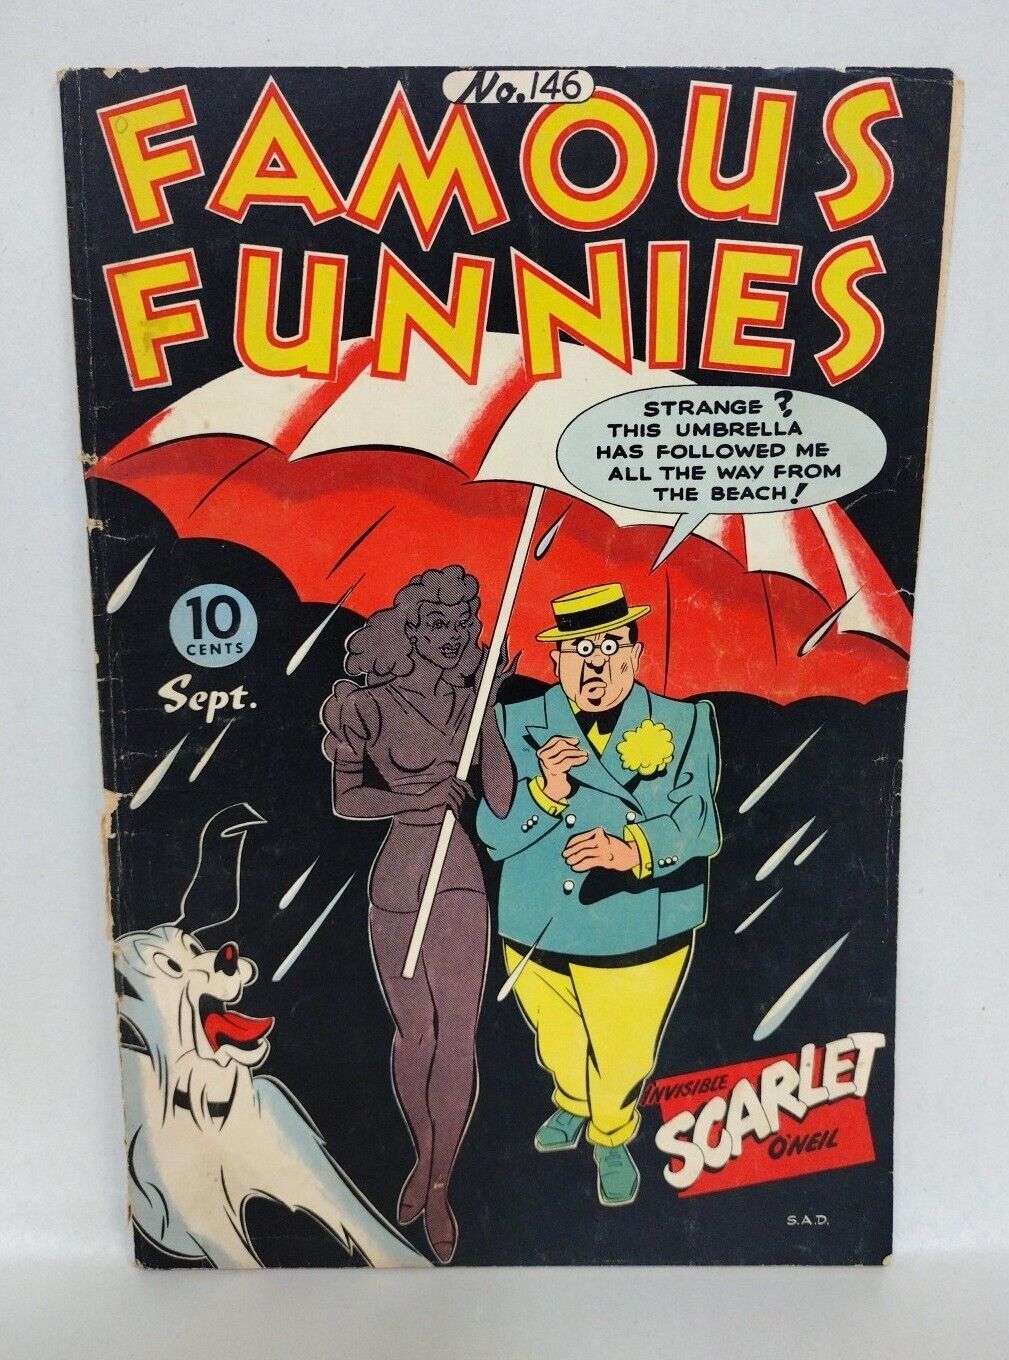 FAMOUS FUNNIES #146 (1946) BUCK ROGERS INVISIBLE SCARLET O\'NEIL Golden Age Comic